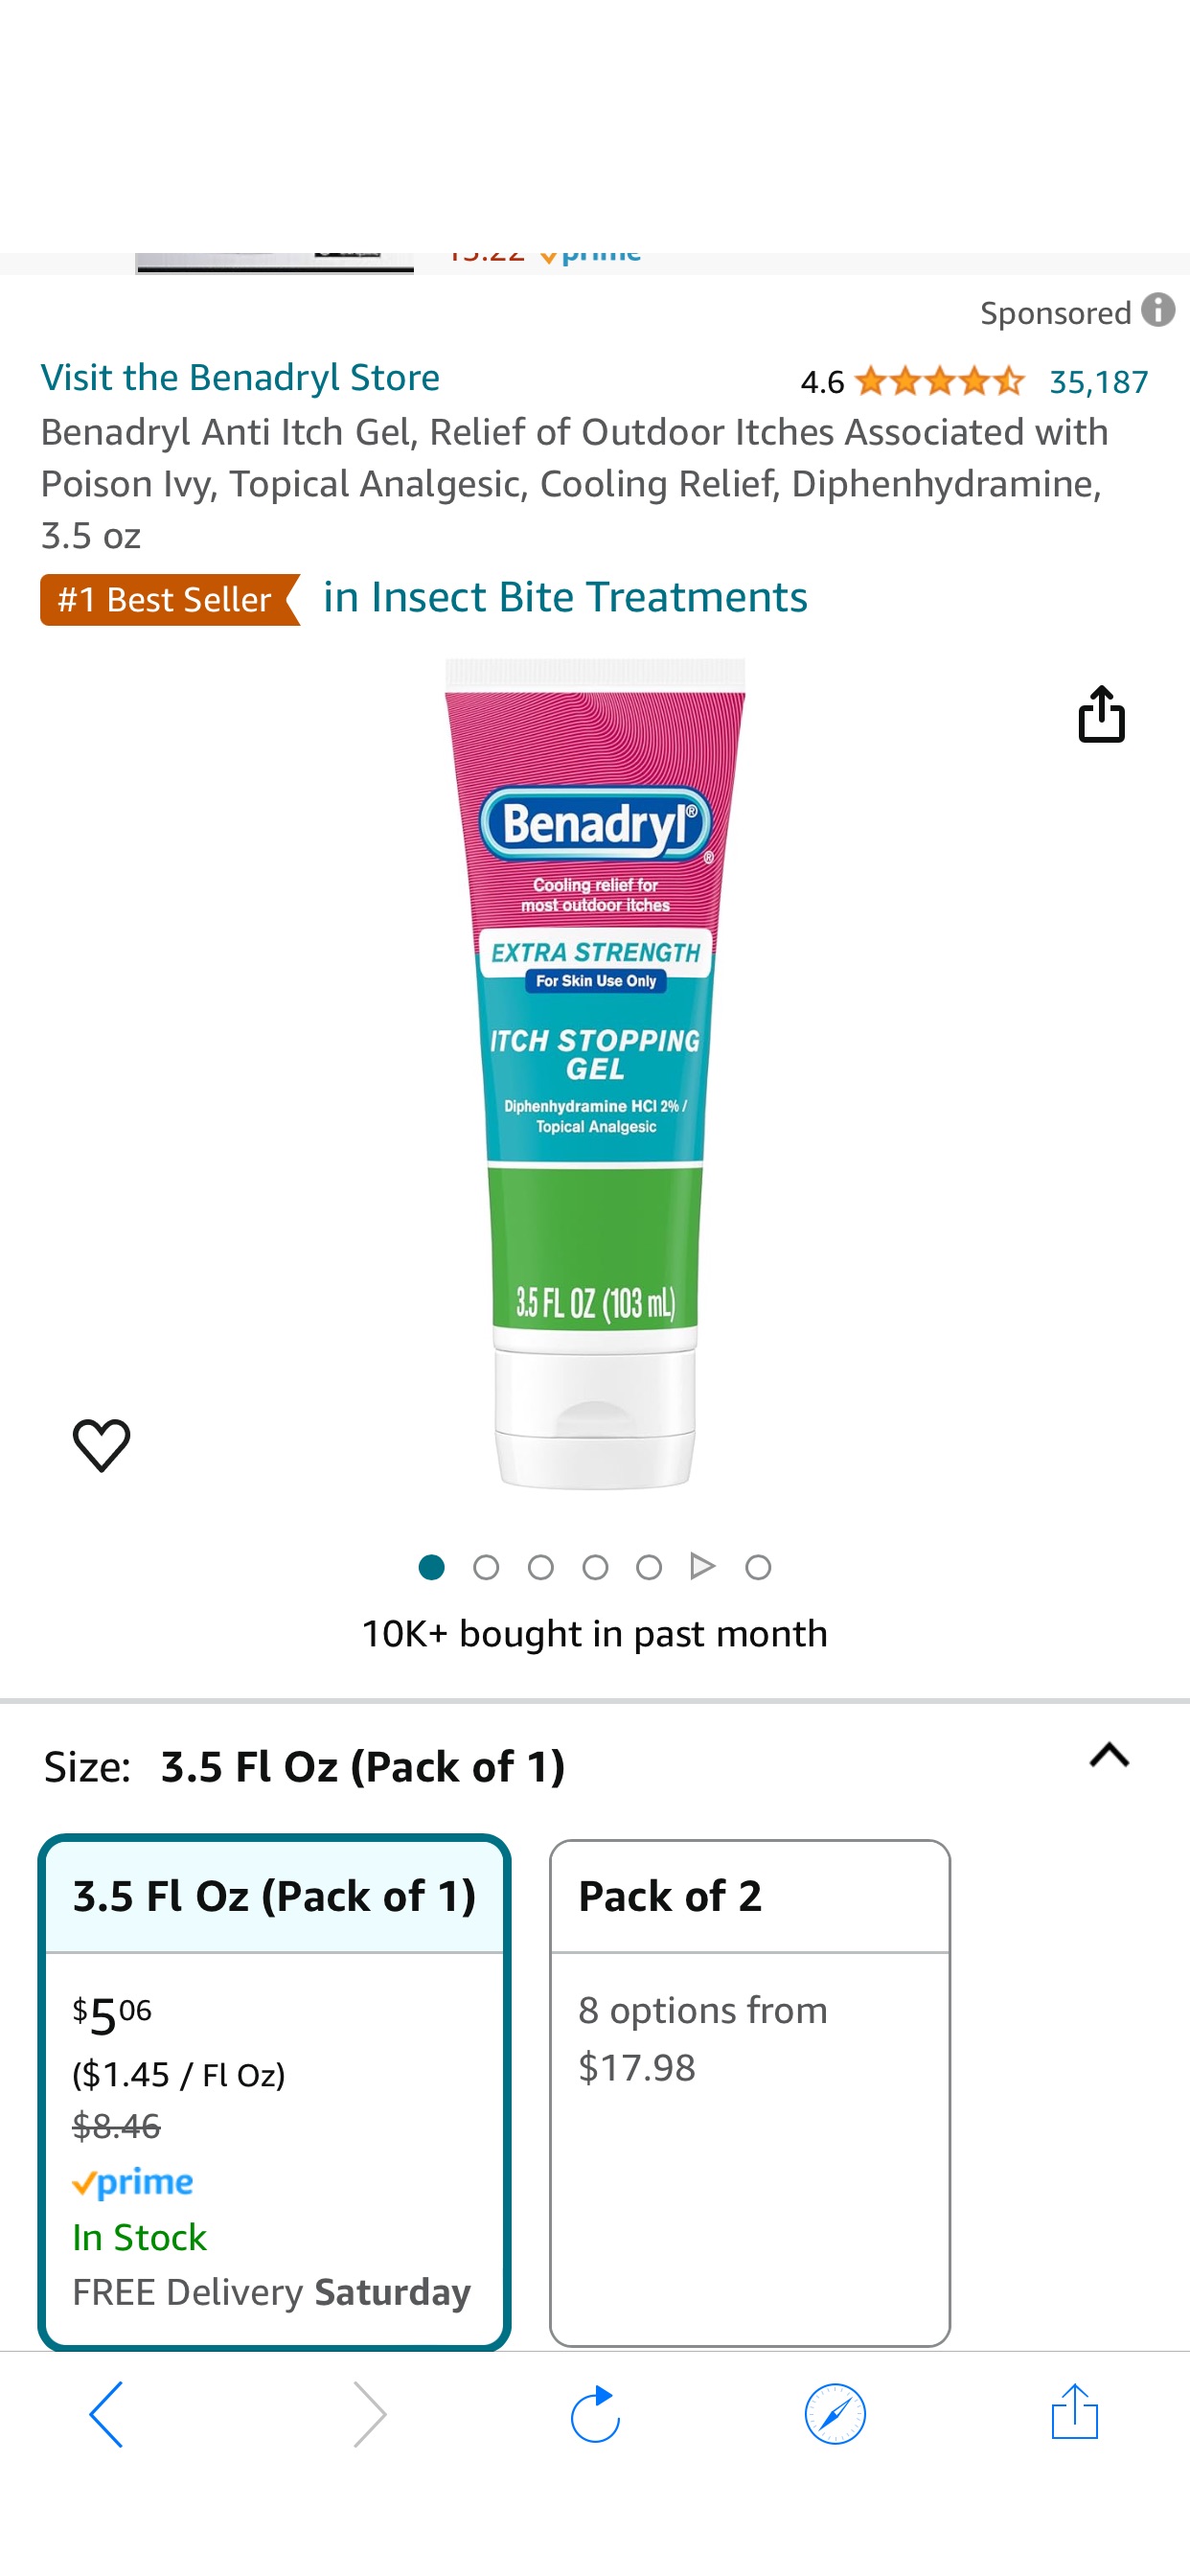 Amazon.com: Benadryl Anti Itch Gel, Relief of Outdoor Itches Associated with Poison Ivy, Topical Analgesic, Cooling Relief, Diphenhydramine, 3.5 oz : Health & Household止痒啫喱膏